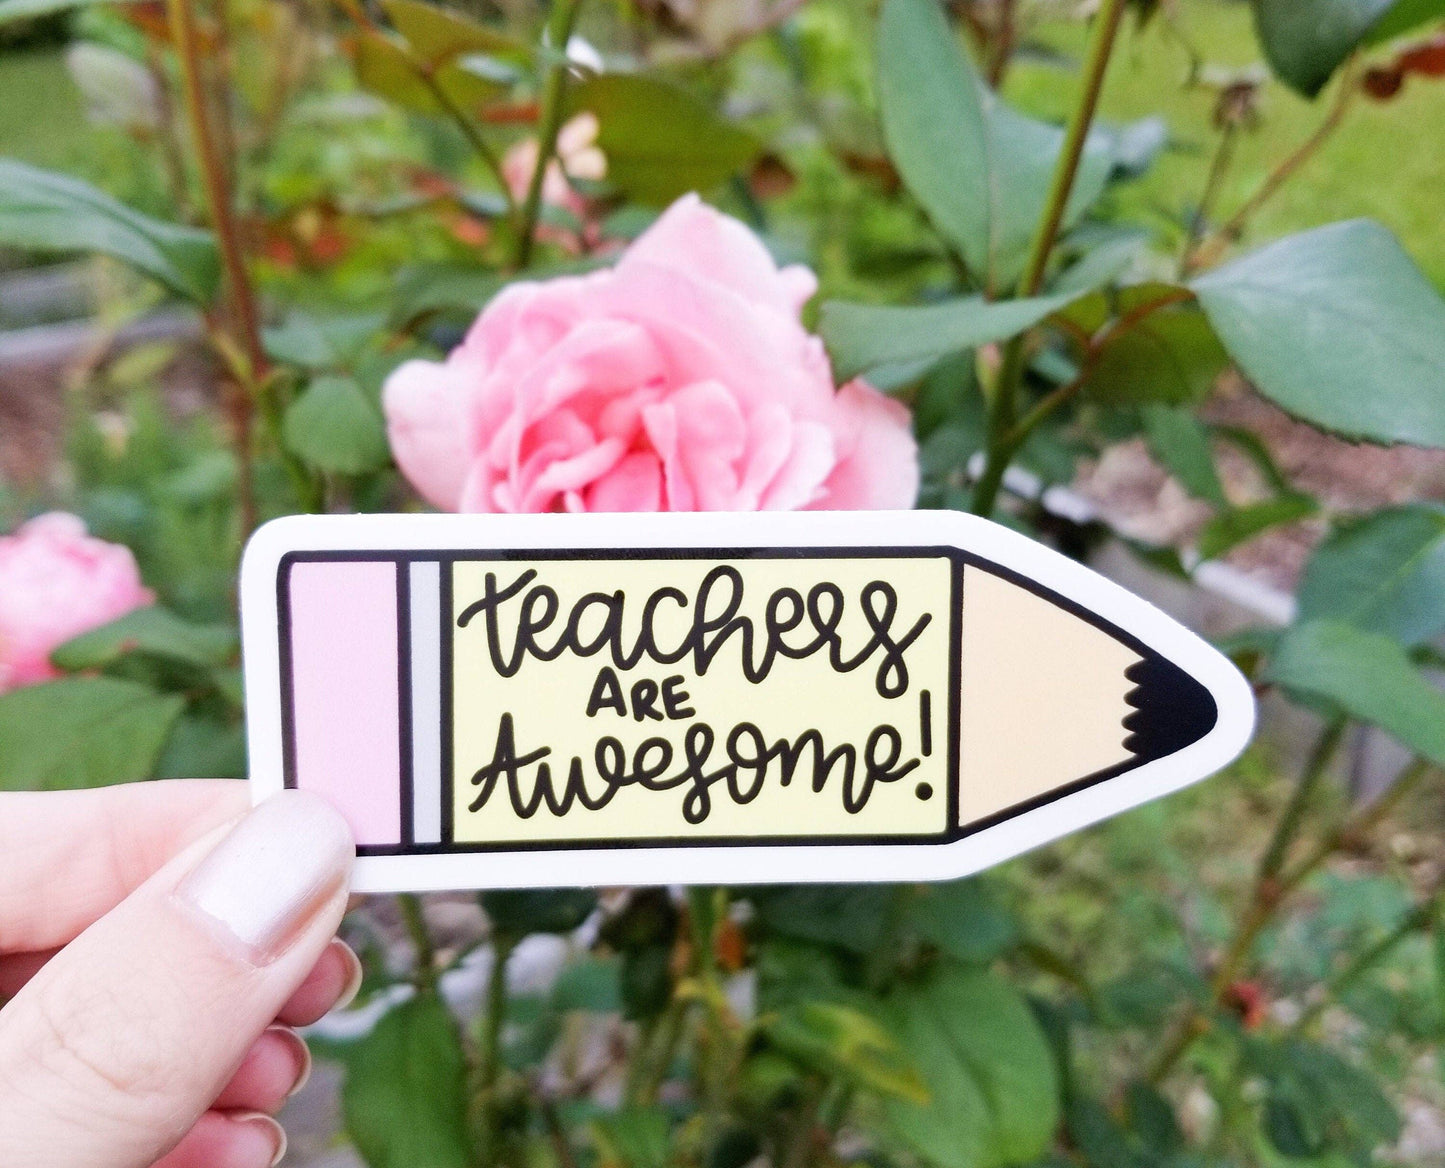 Teachers Are Awesome! Sticker